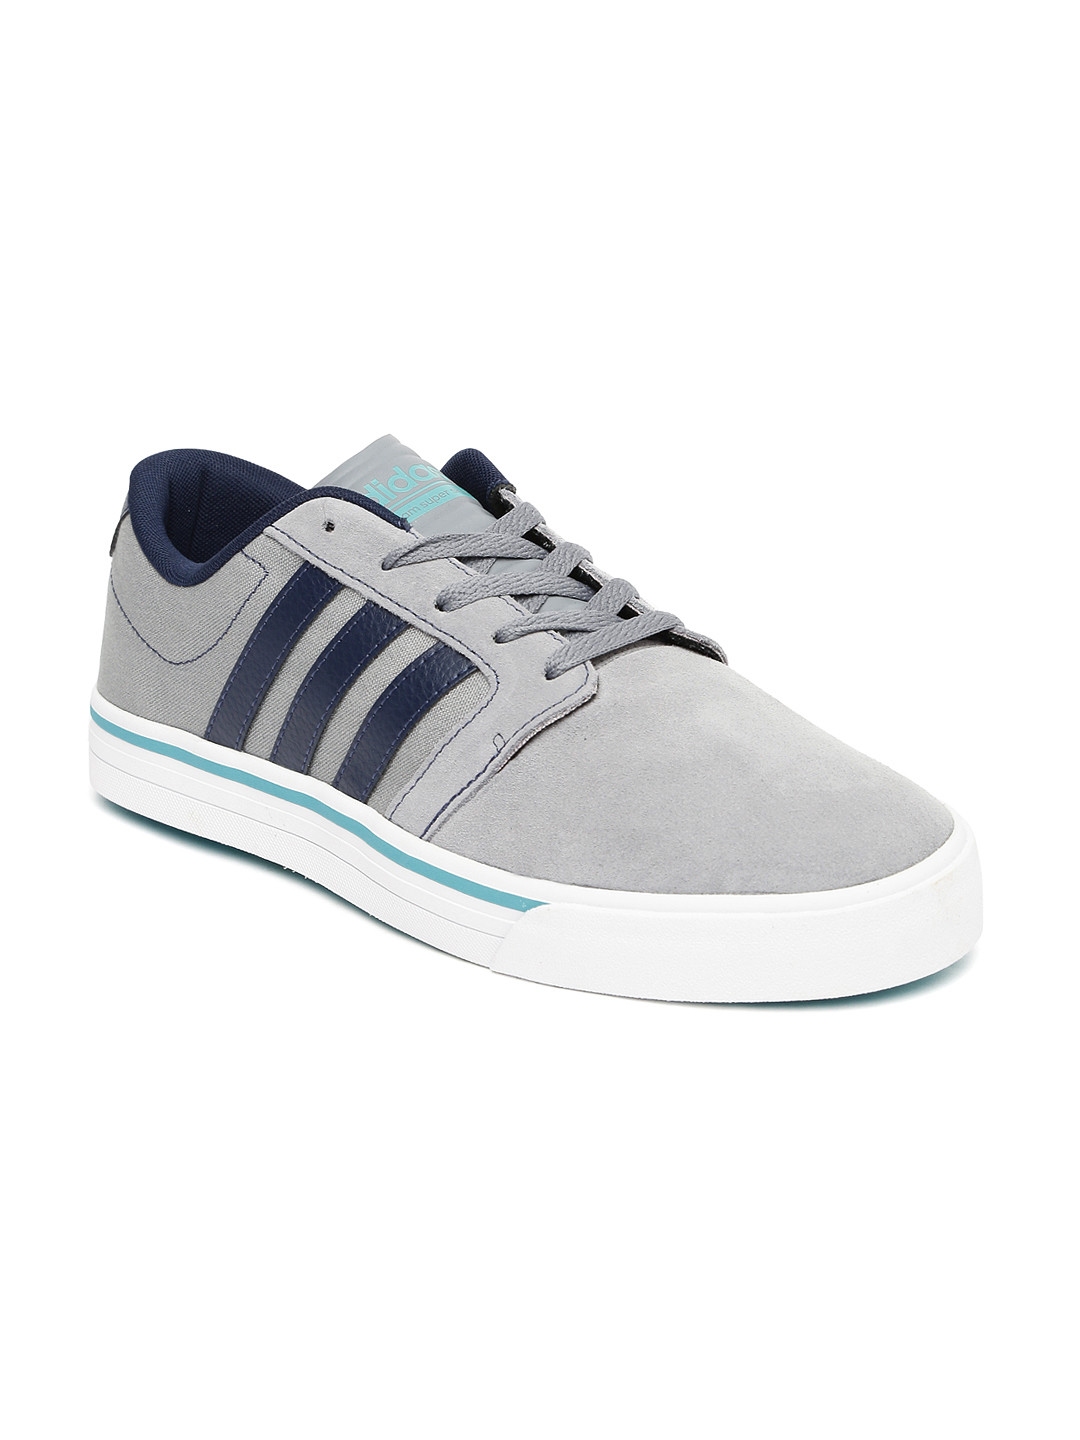 Buy ADIDAS NEO Men Grey Solid Suede Leather Cloudfoam Super Skate ...